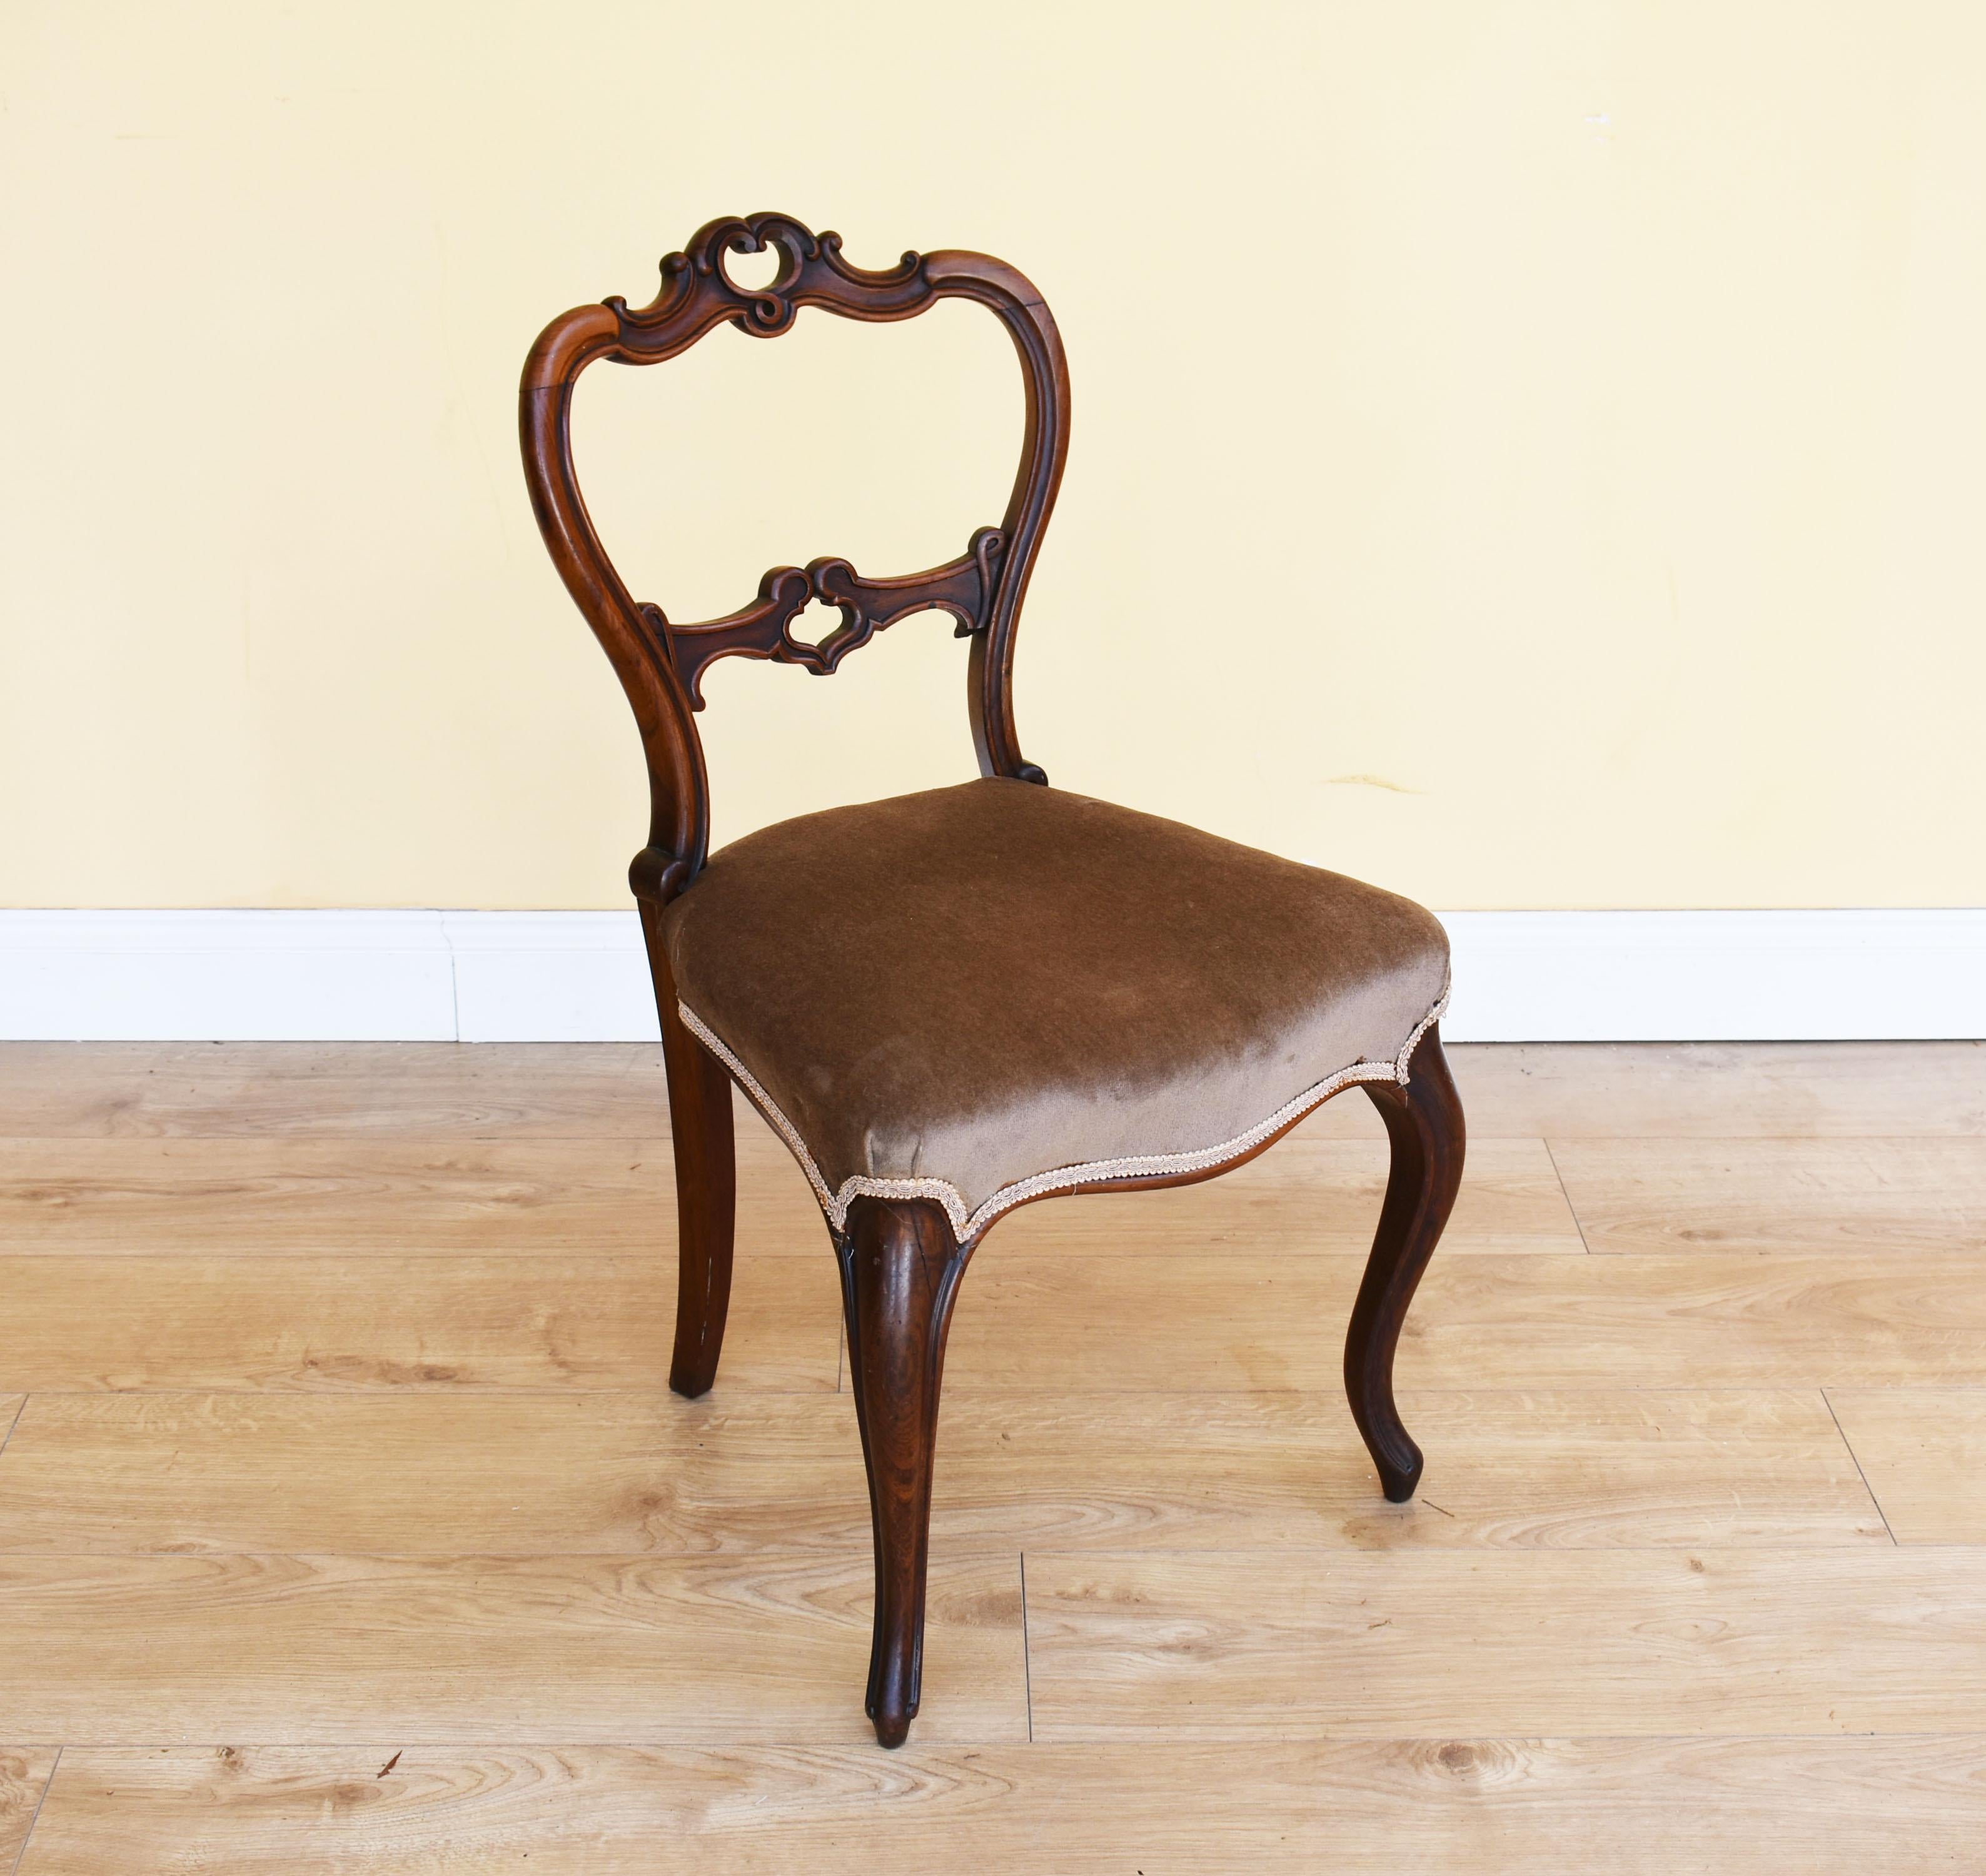 For sale is a good quality set of six Victorian rosewood dining chairs, each with shaped backs above an upholstered seat, standing on elegant cabriole legs. All of the chairs are in good condition, being structurally sound and all of the upholstery